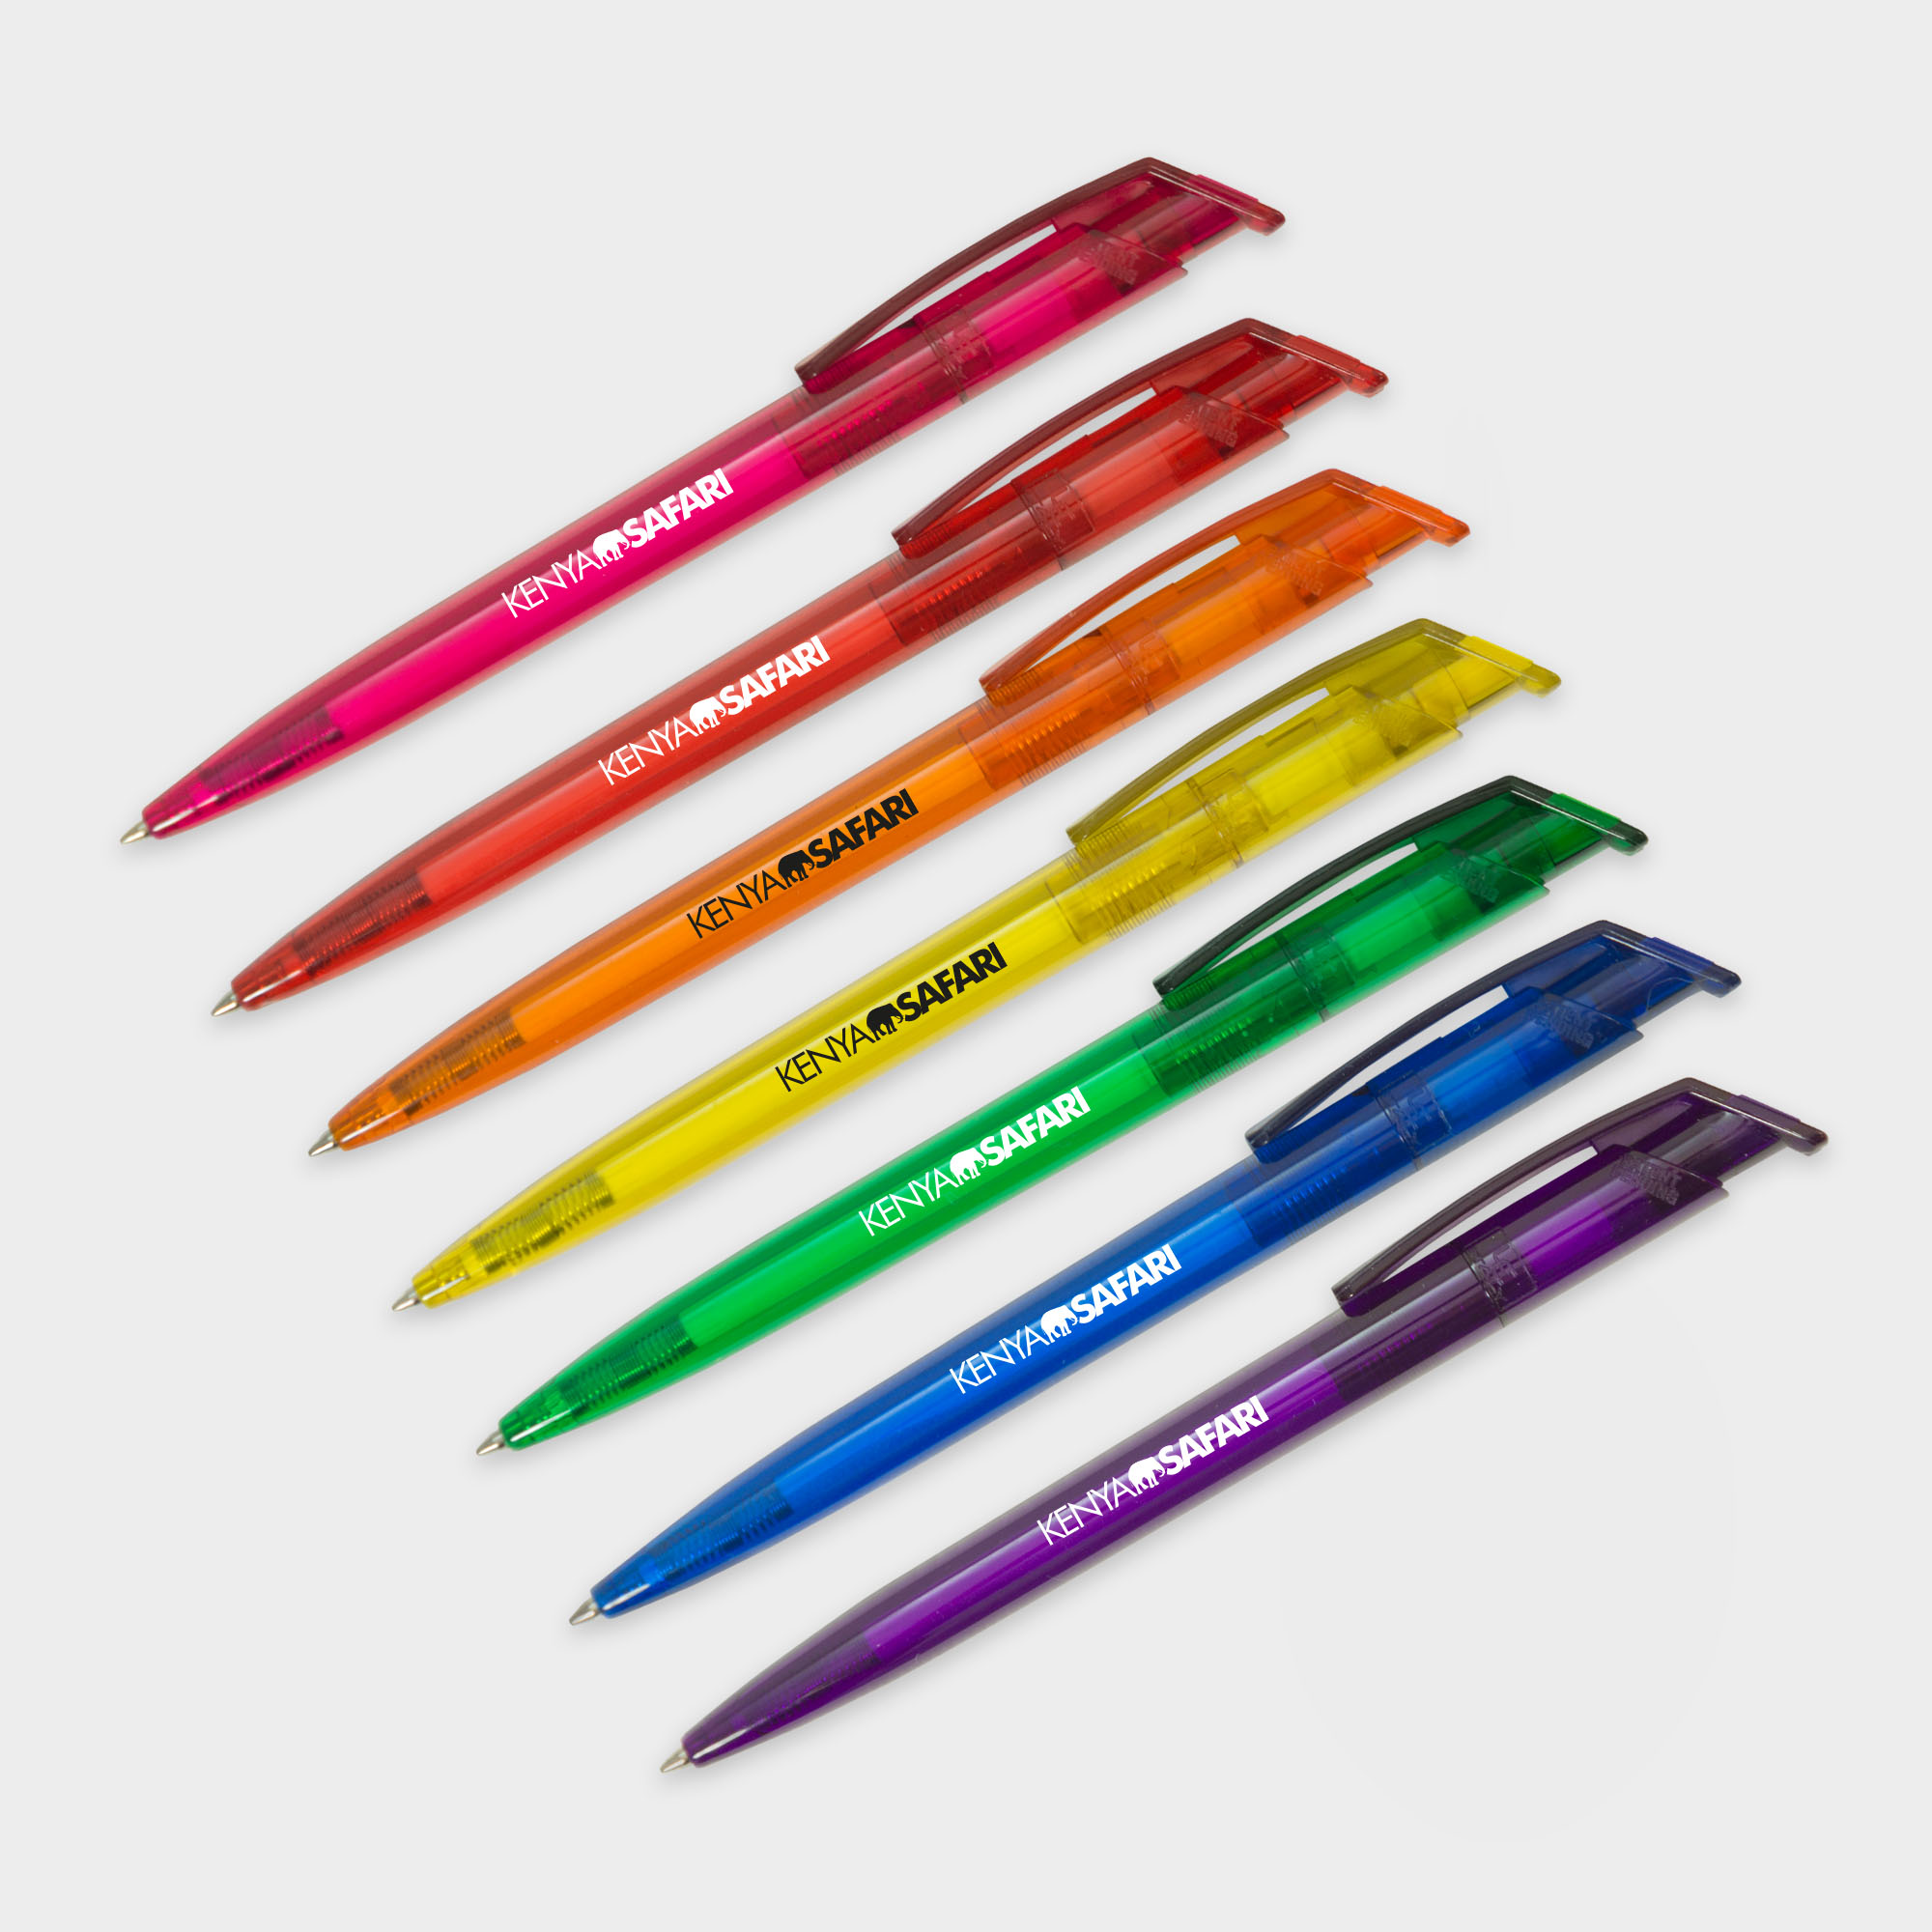 The Green & Good Litani Pen. An eco-friendly and high-quality pen made from recycled plastic bottles (rPET) with black ink refills and a frosted body. Made in the EU and available in a variety of colours.